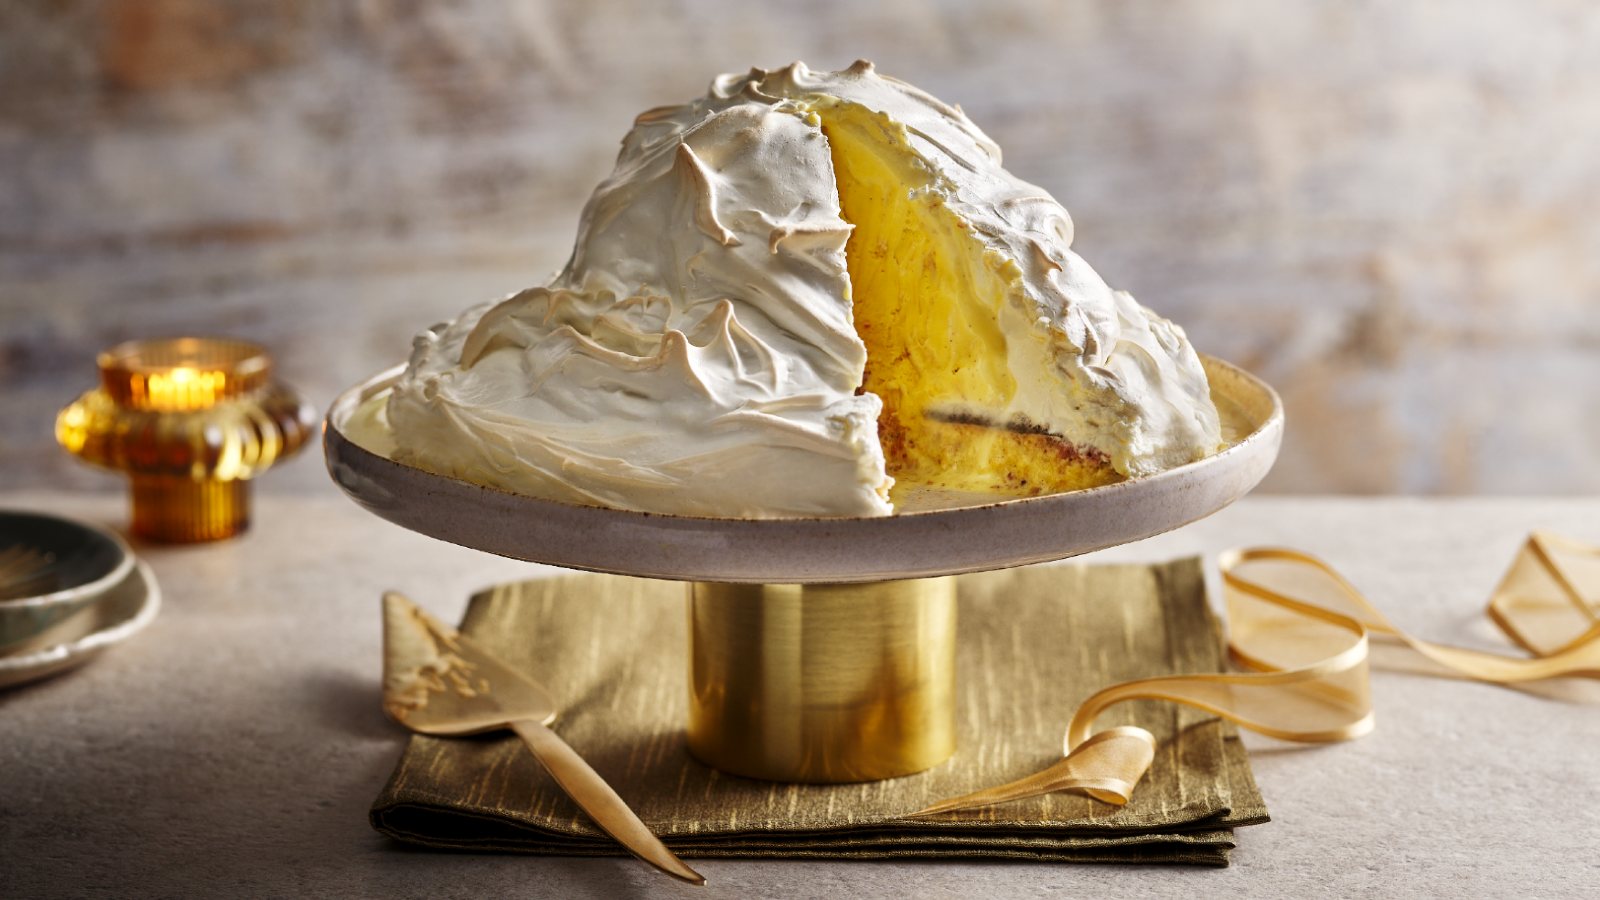 How to make the perfect baked Alaska